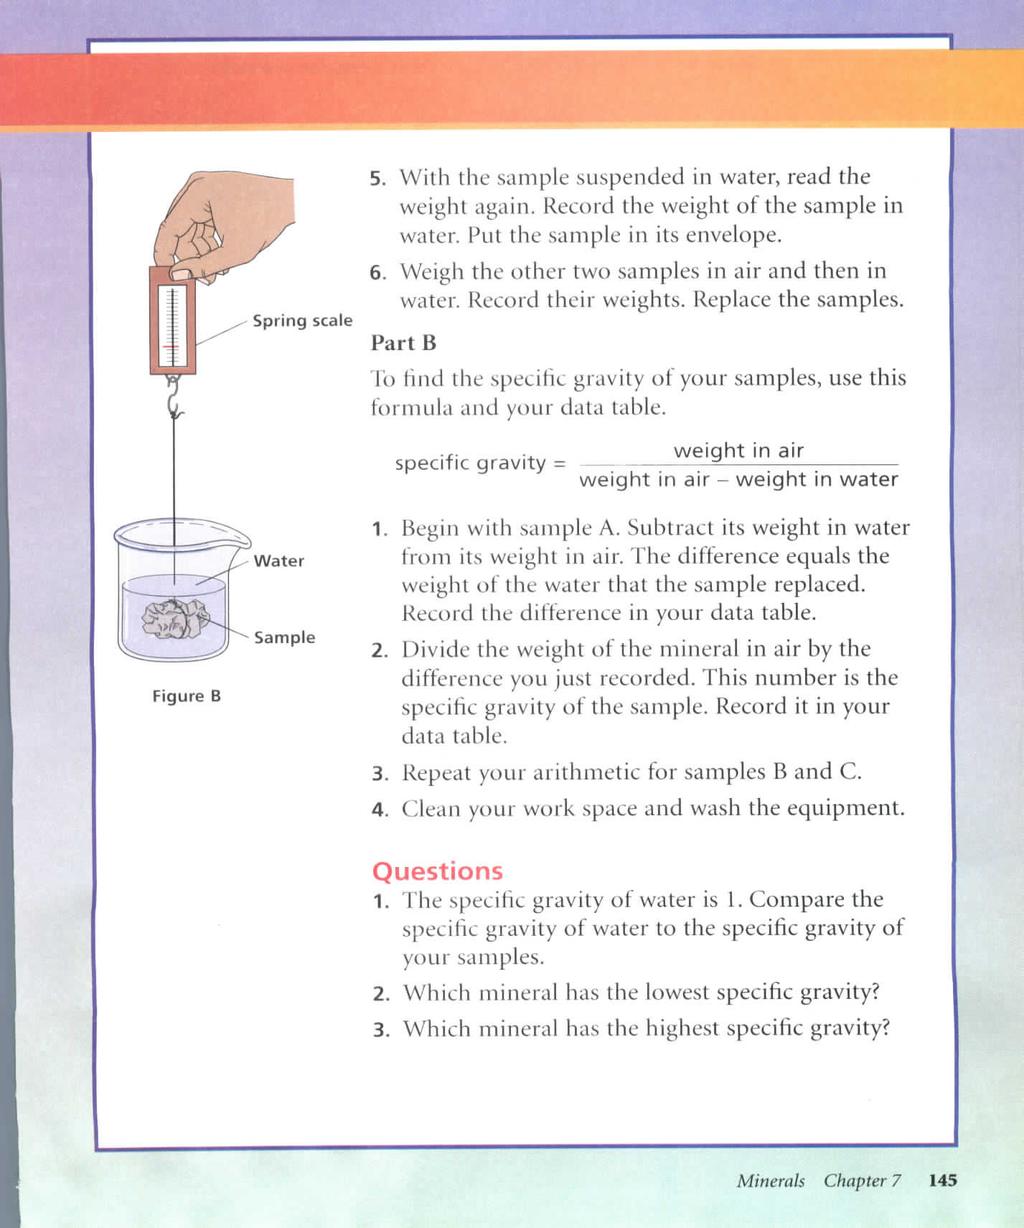 Spring scale 5. With the sample suspended in water, read the weight again. Record the weight of the sample in water. Put the sample in its envelope. 6.